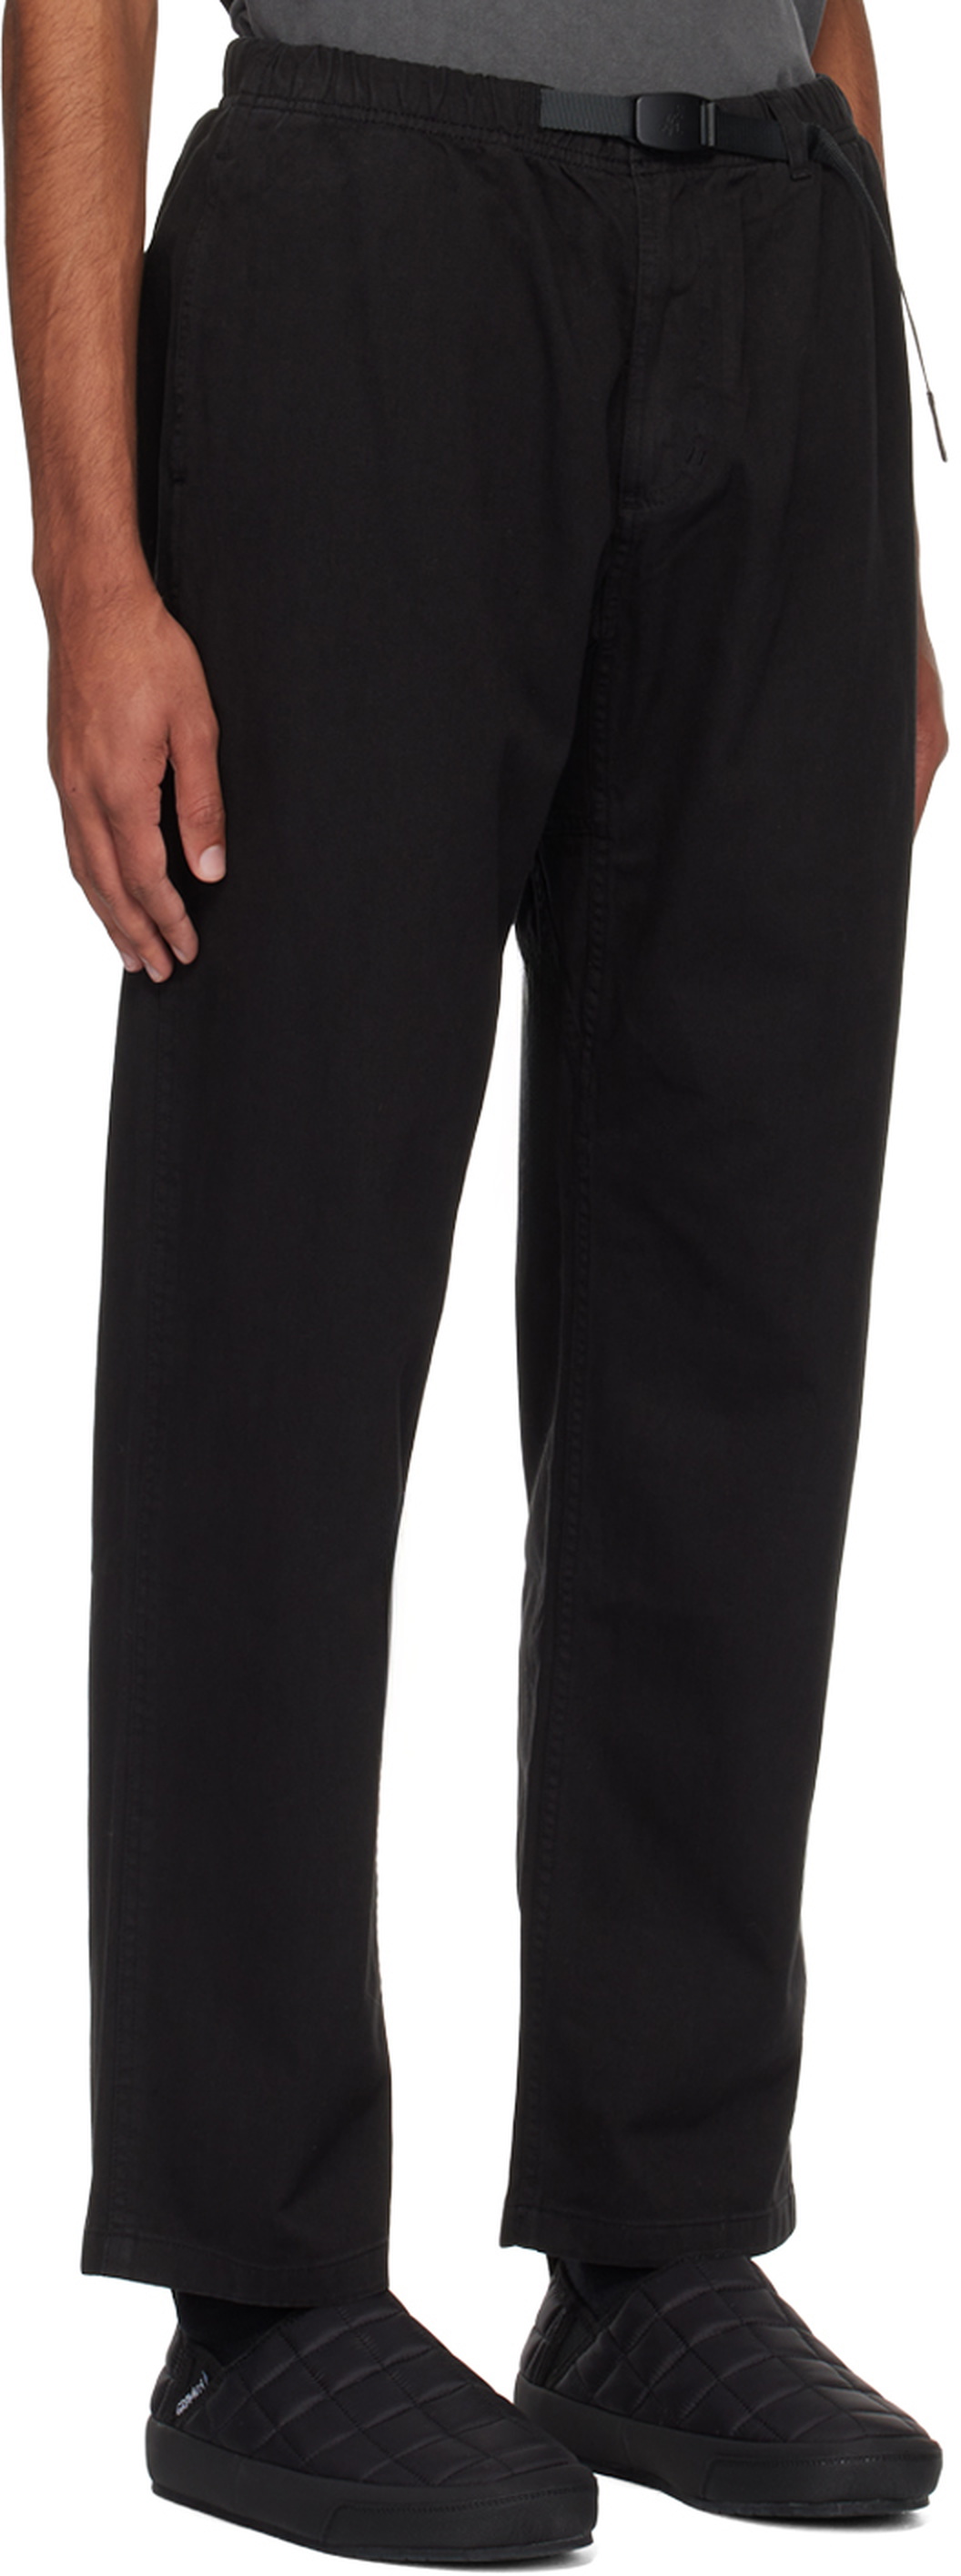 Gramicci Black Relaxed-Fit Trousers Gramicci